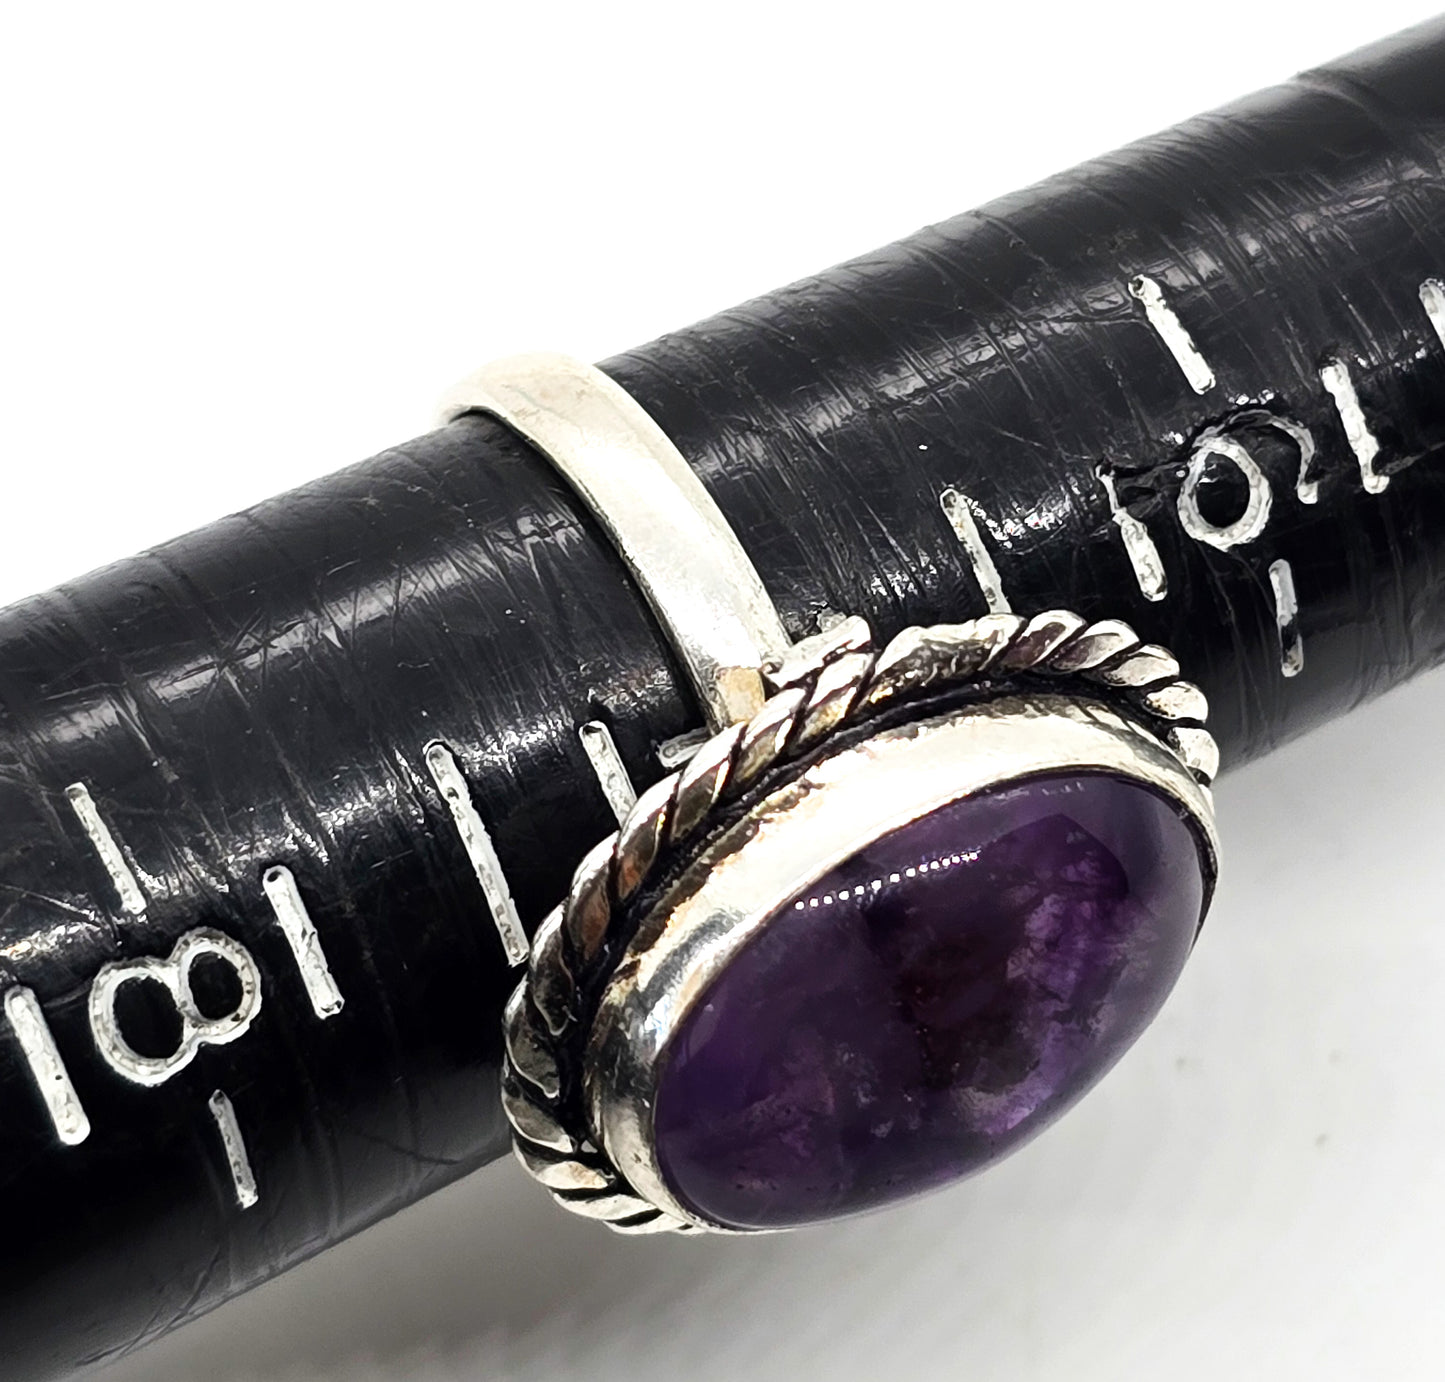 Amethyst with dark inclusions vintage sterling silver ring size 7